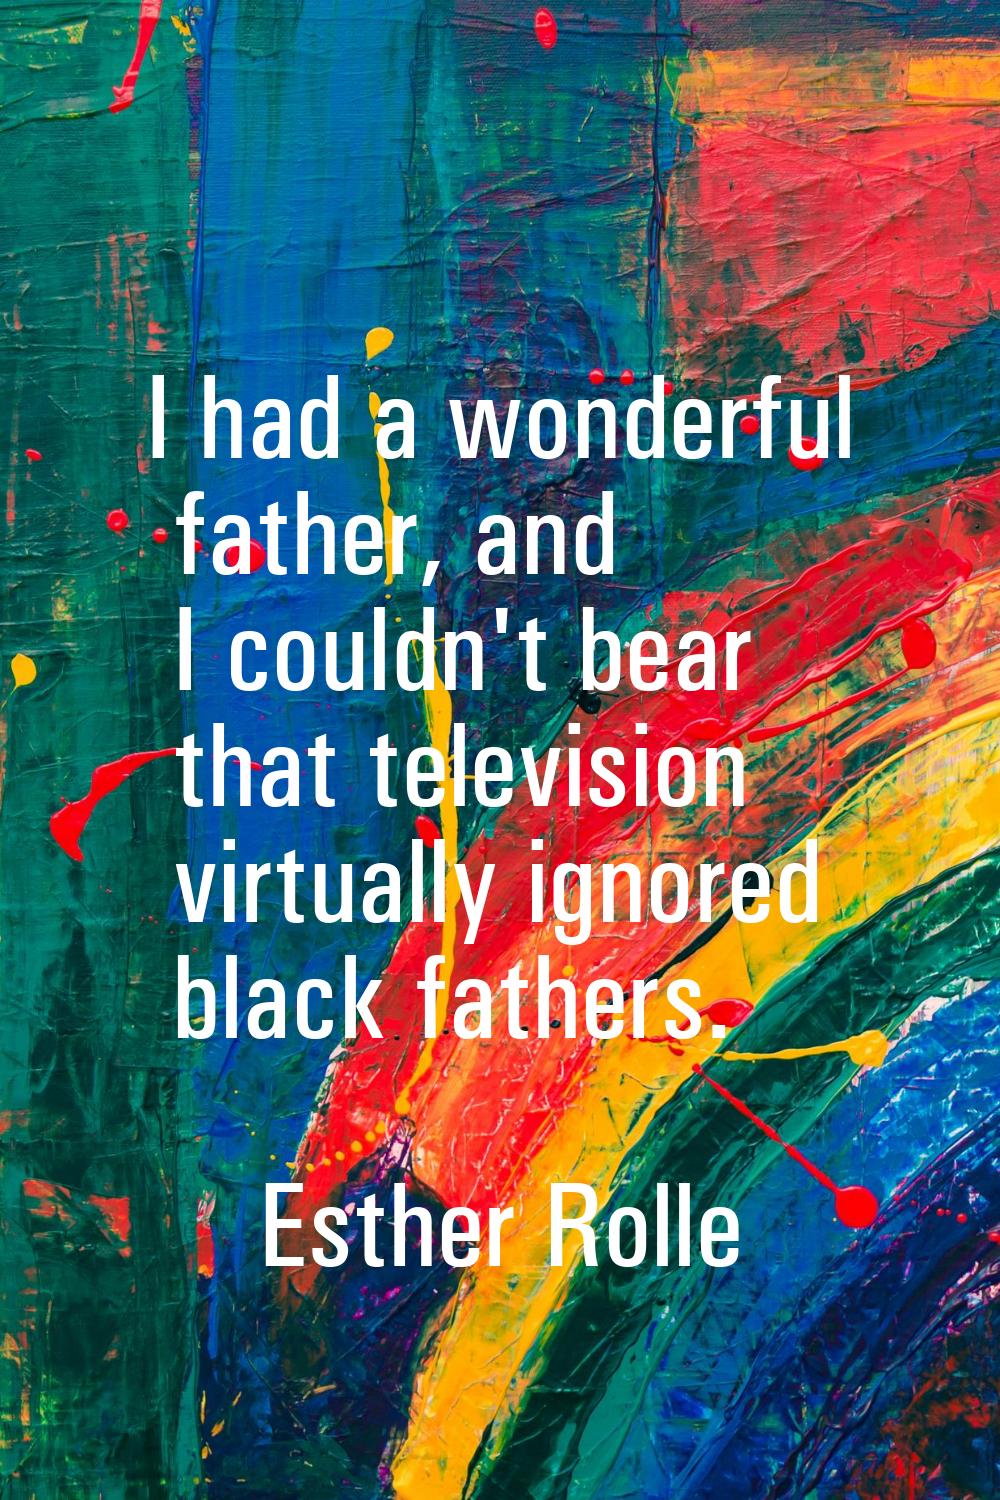 I had a wonderful father, and I couldn't bear that television virtually ignored black fathers.